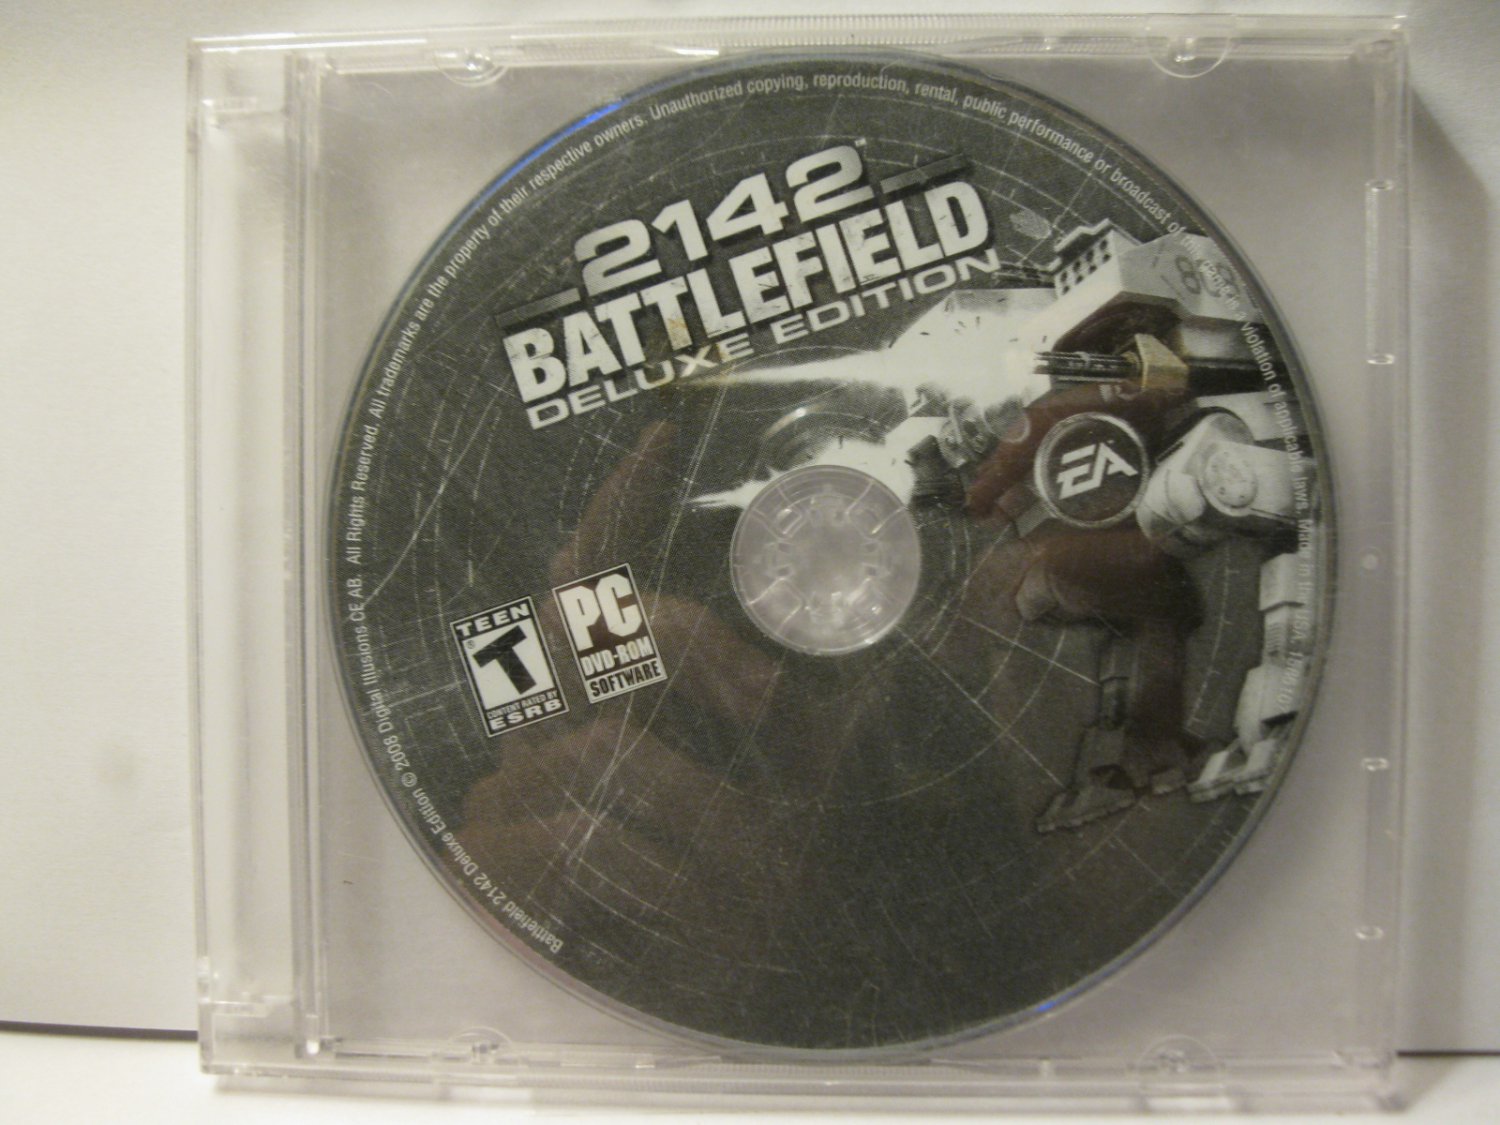 2008 PC Video Game: 2142 Battlefield - Deluxe Edition , disc only